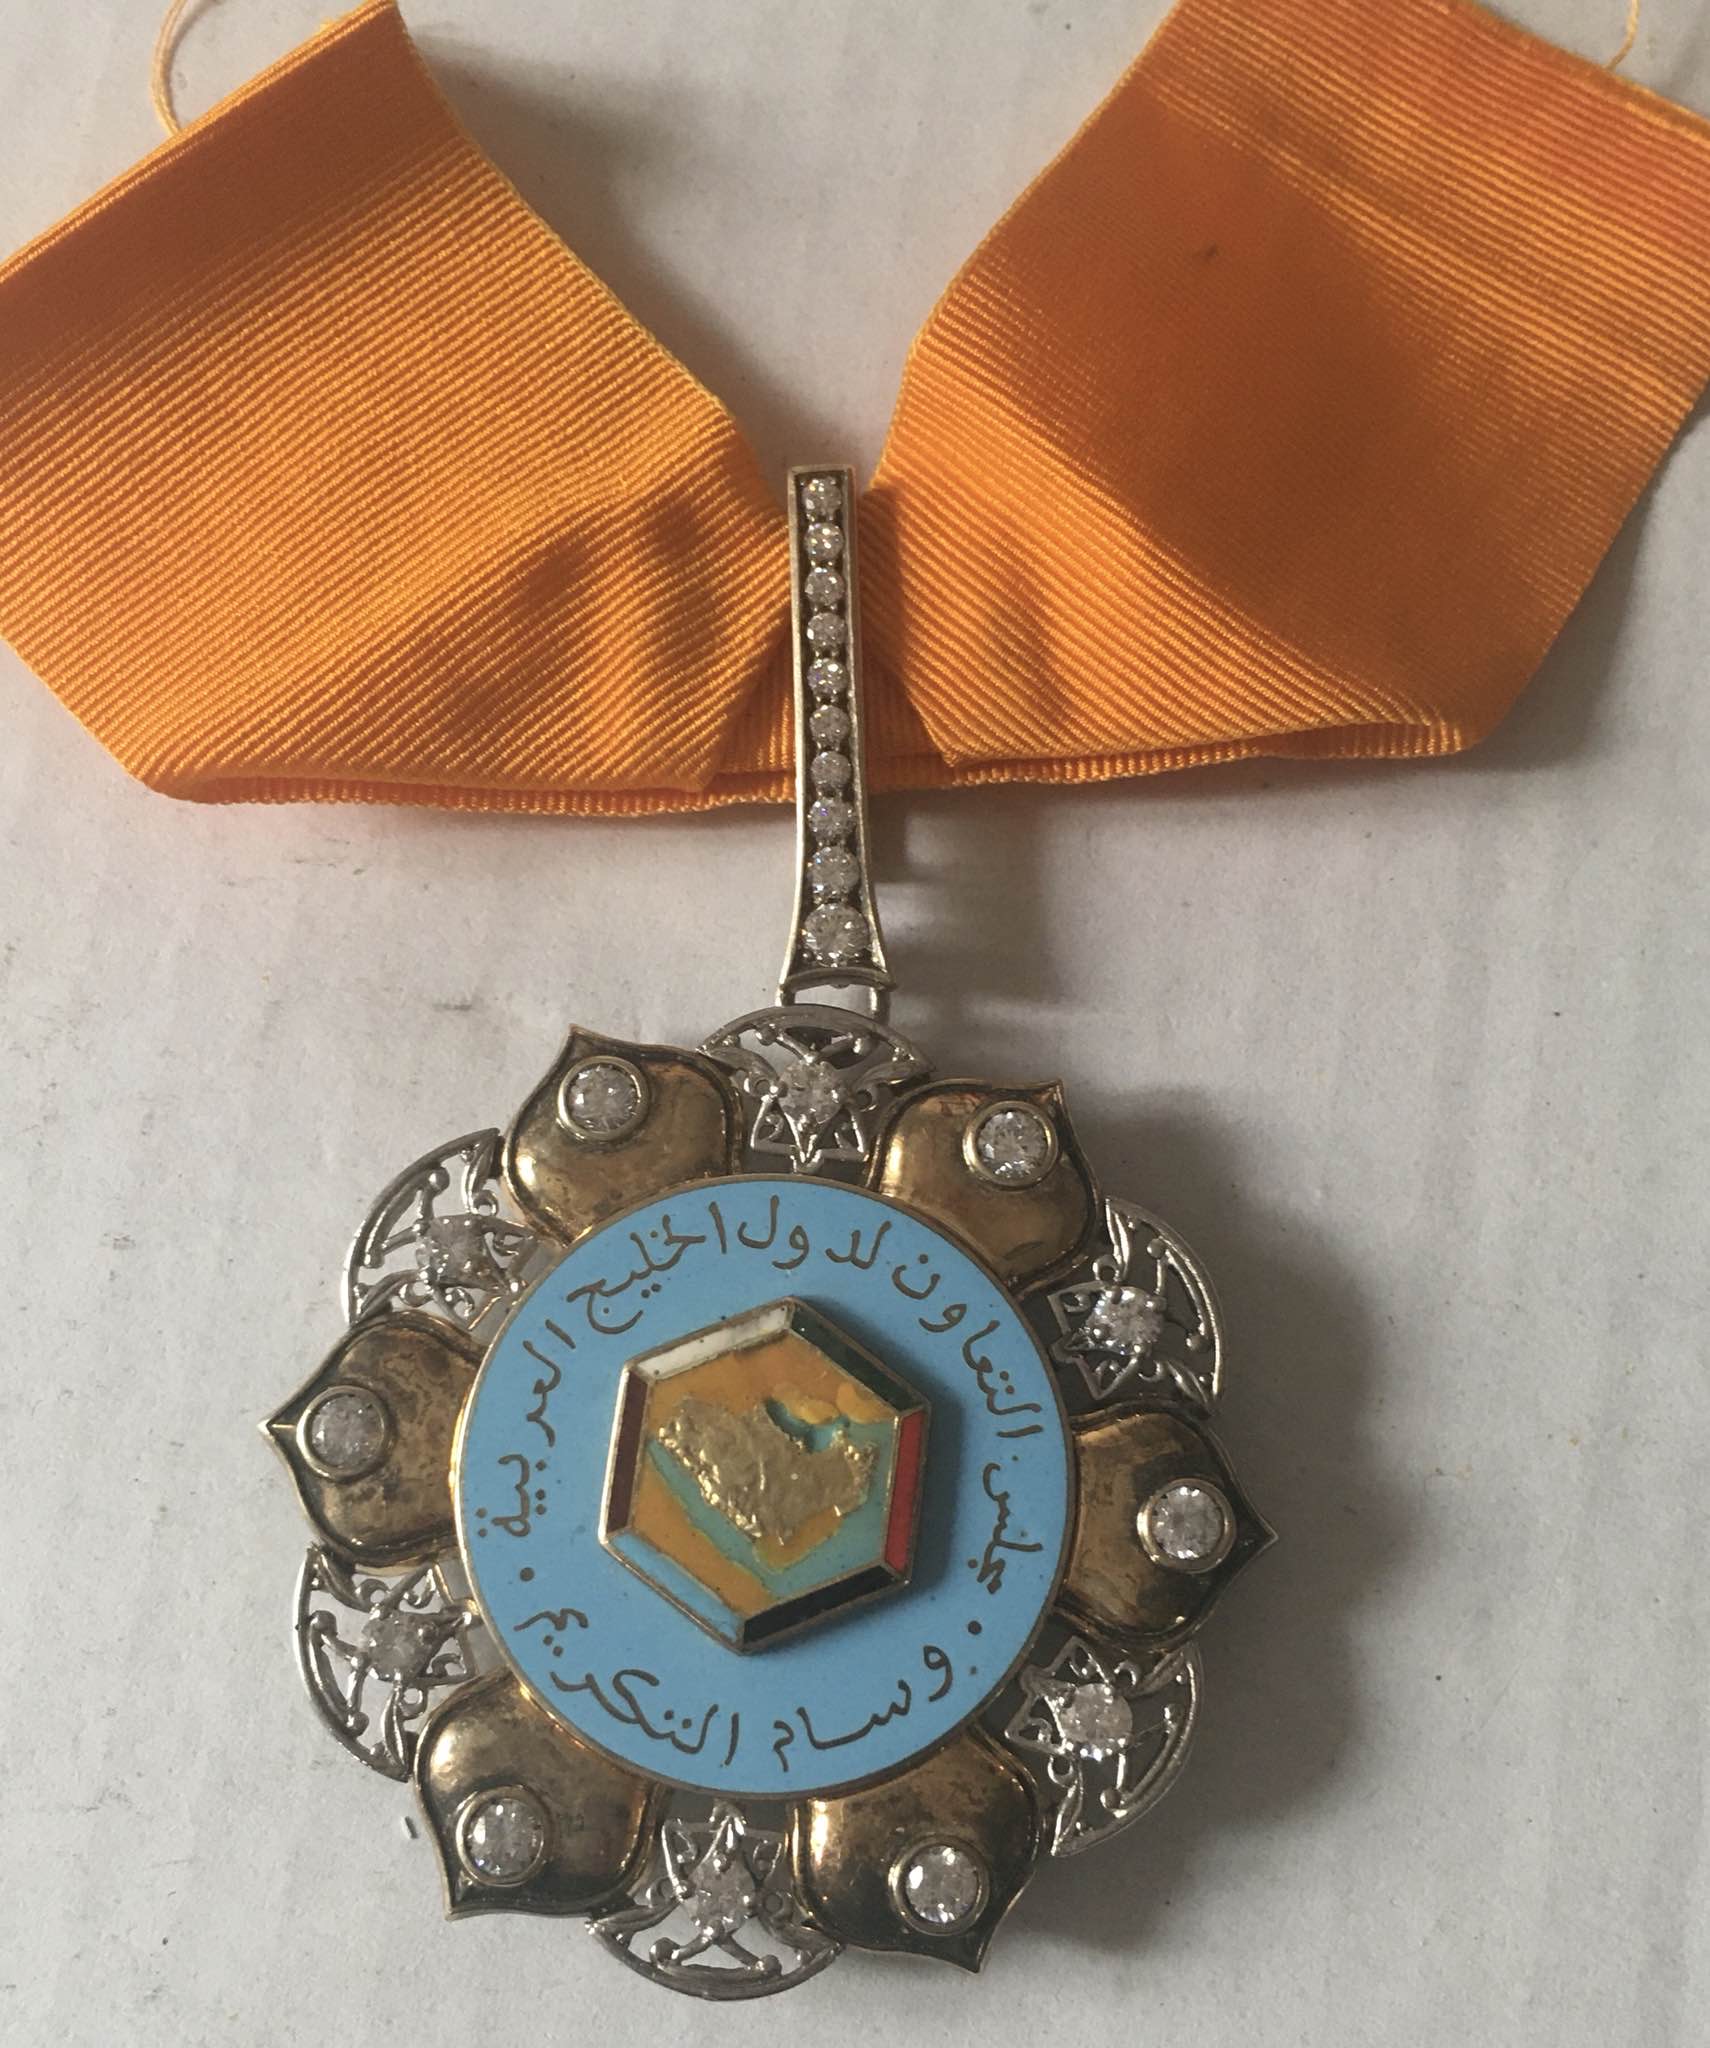 1989 Oman Muscat Gulf Cooperation Council Honouring Medal Badge Gold Diamonds